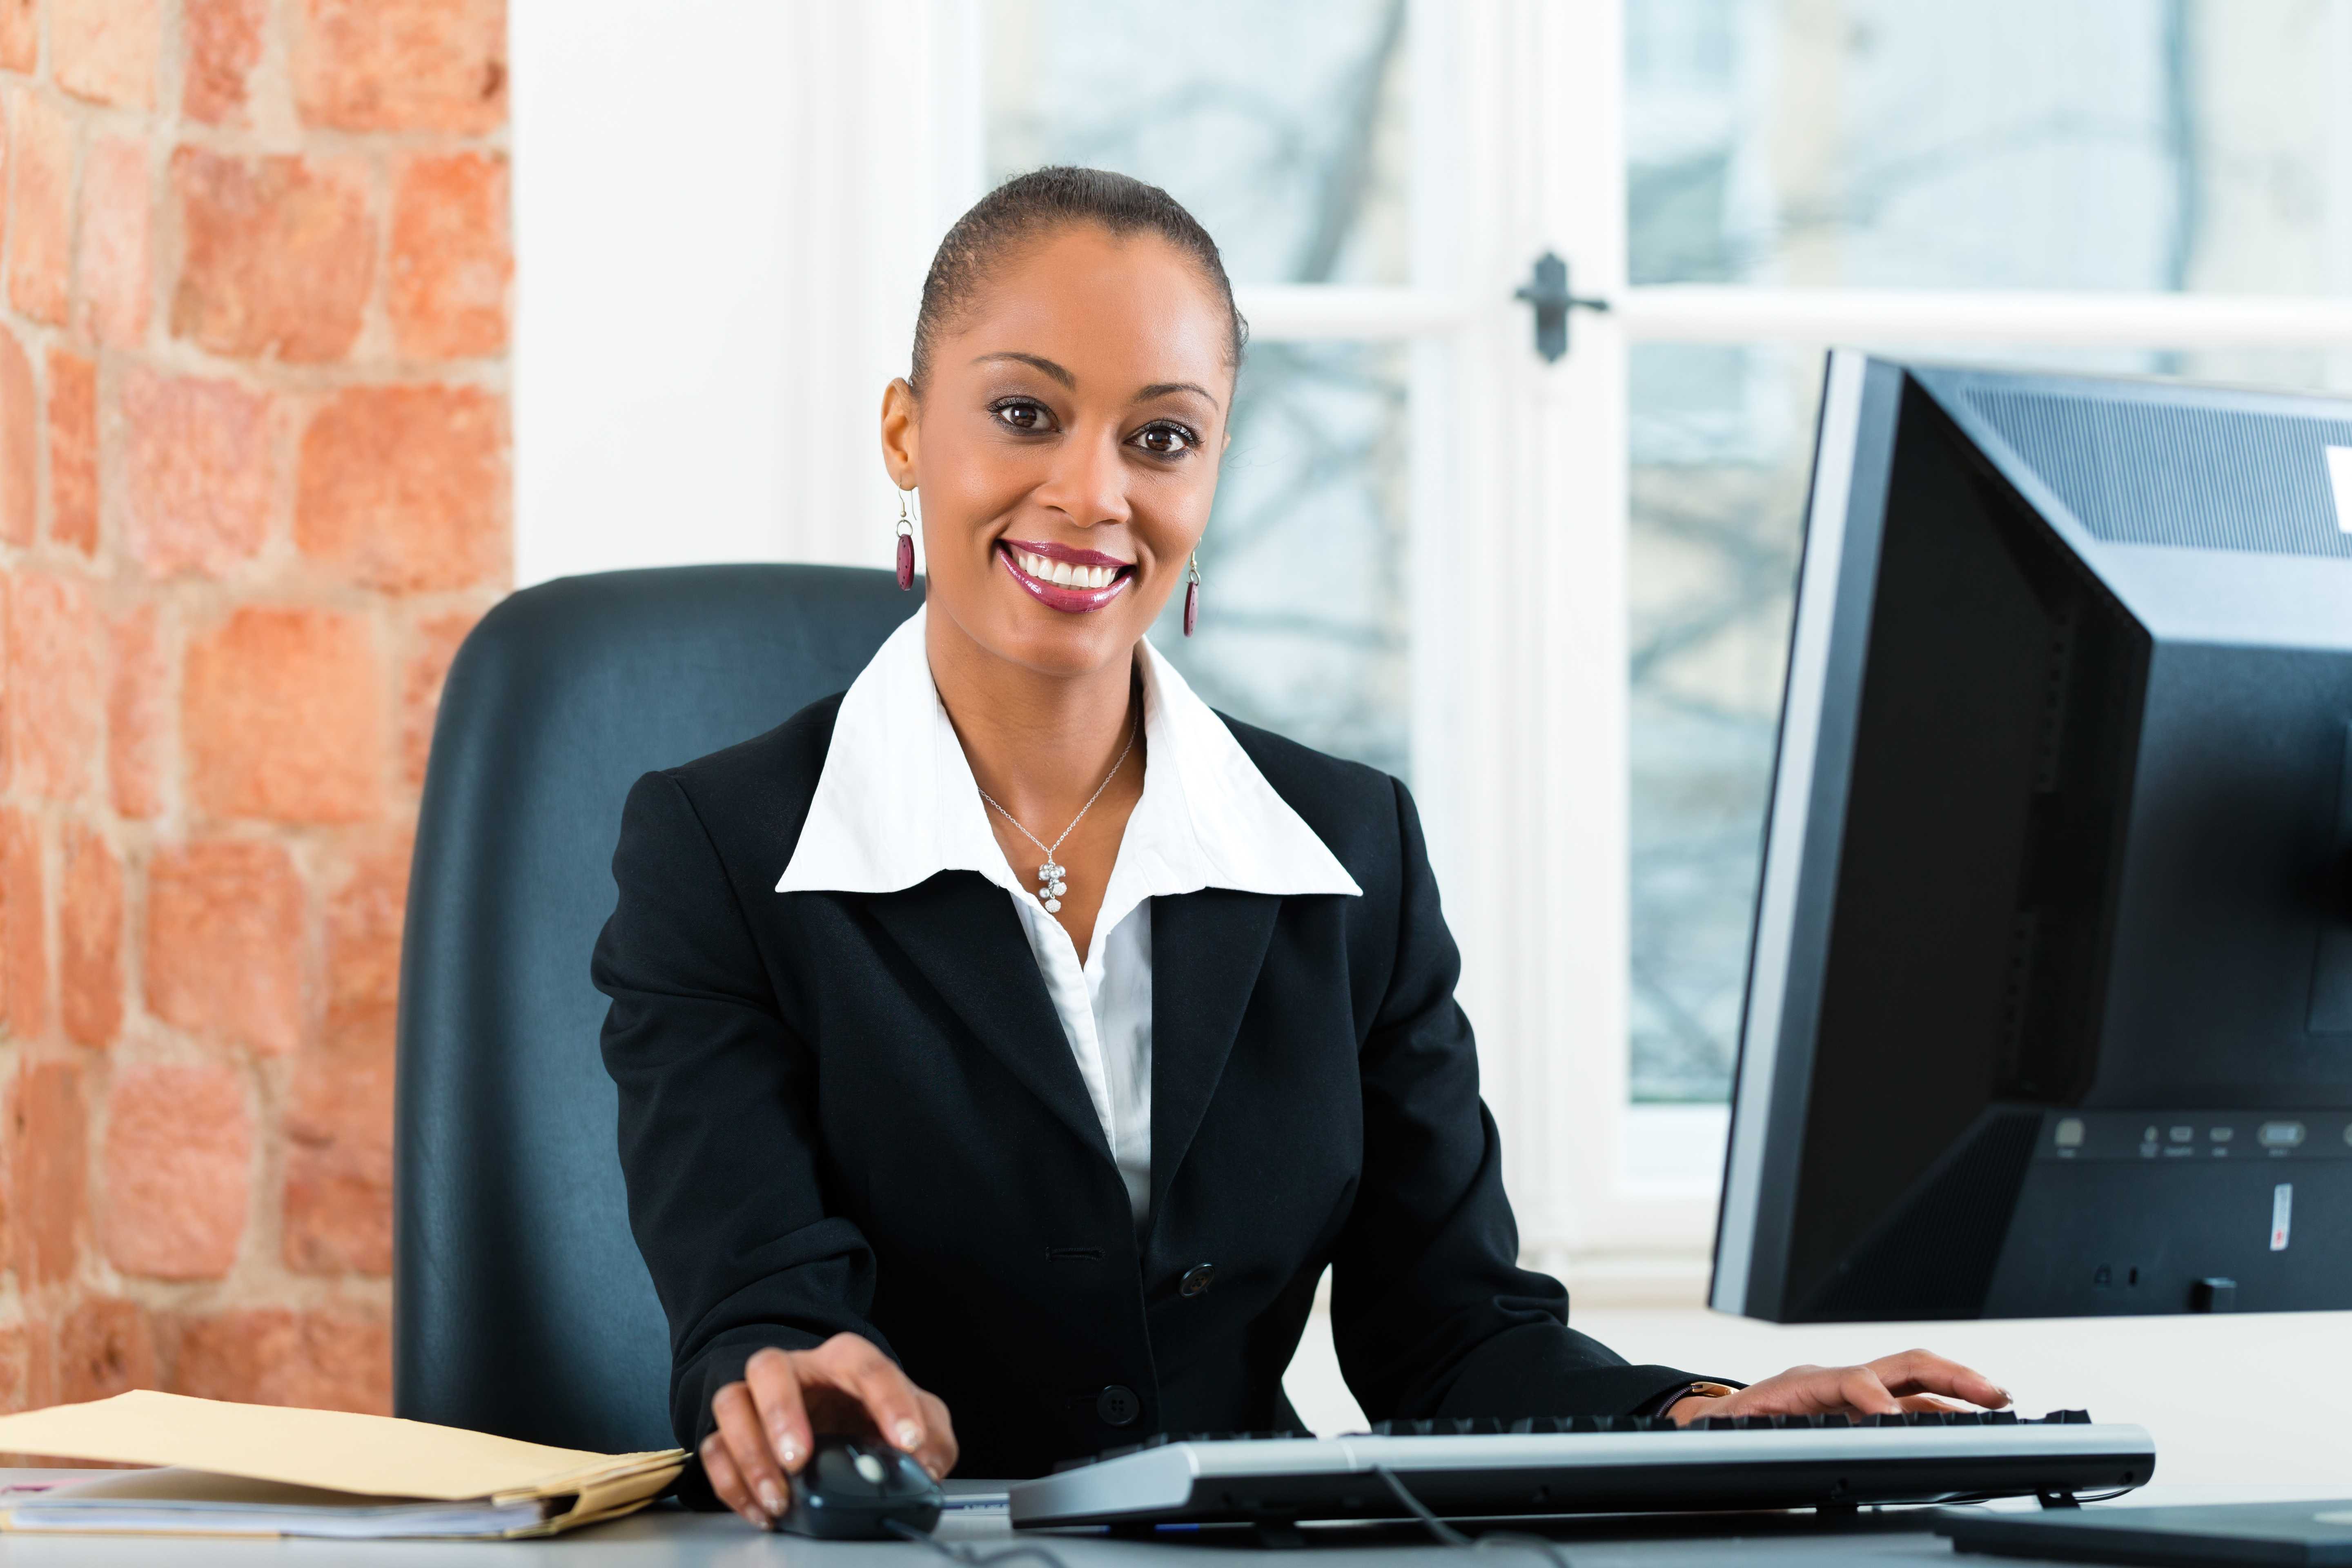 3 Reasons Paralegal Work is Now a Promising Career